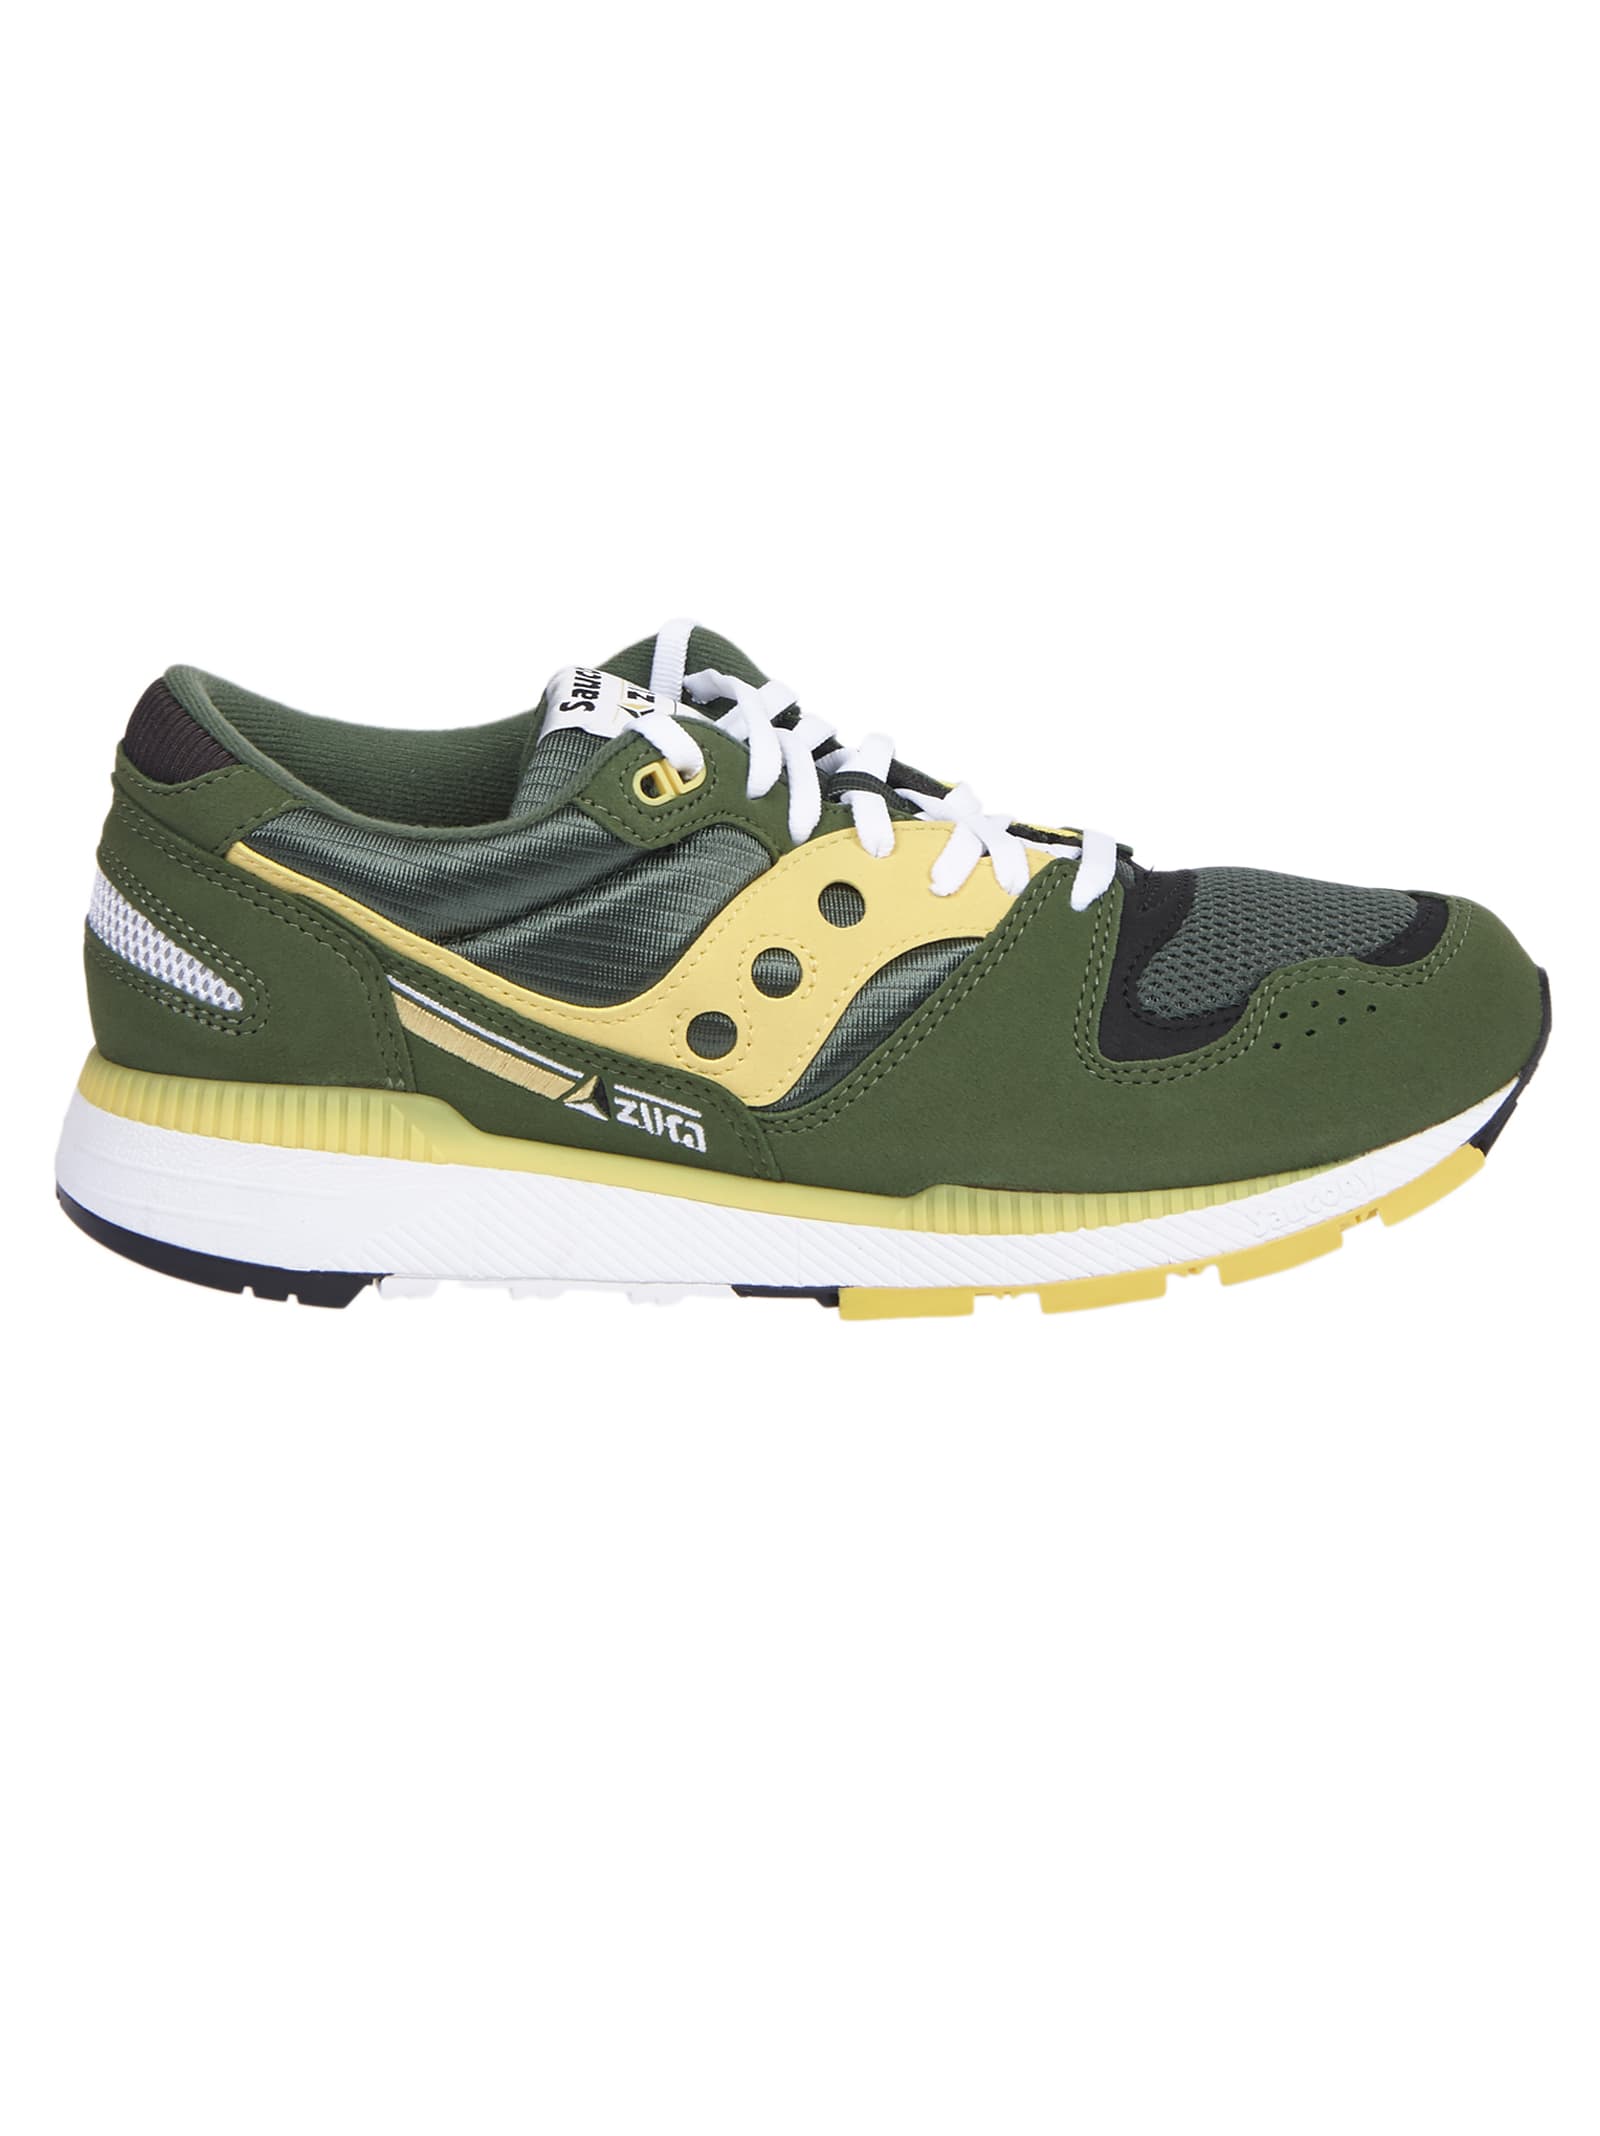 saucony green and yellow shoes